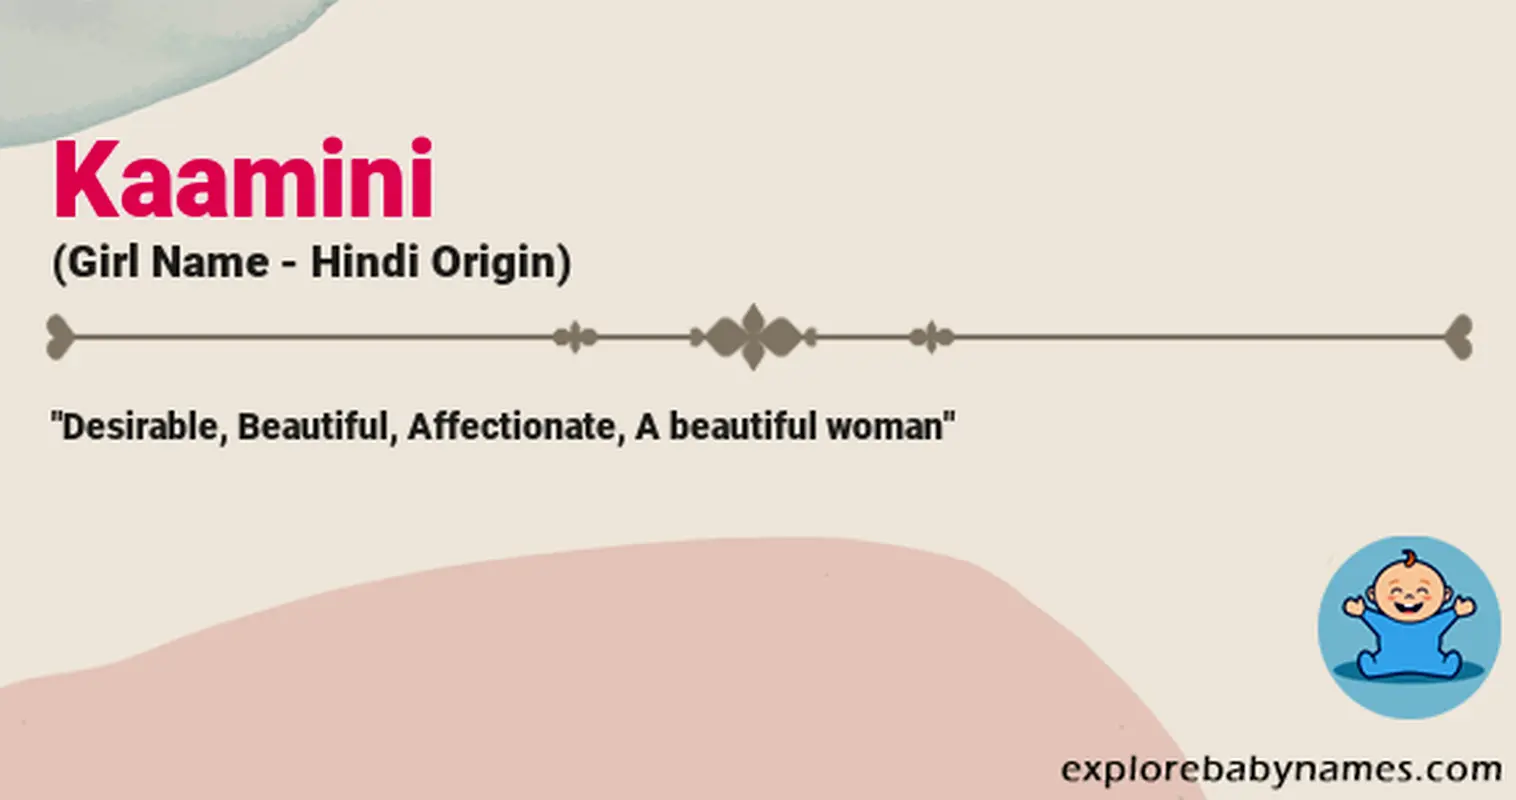 Meaning of Kaamini